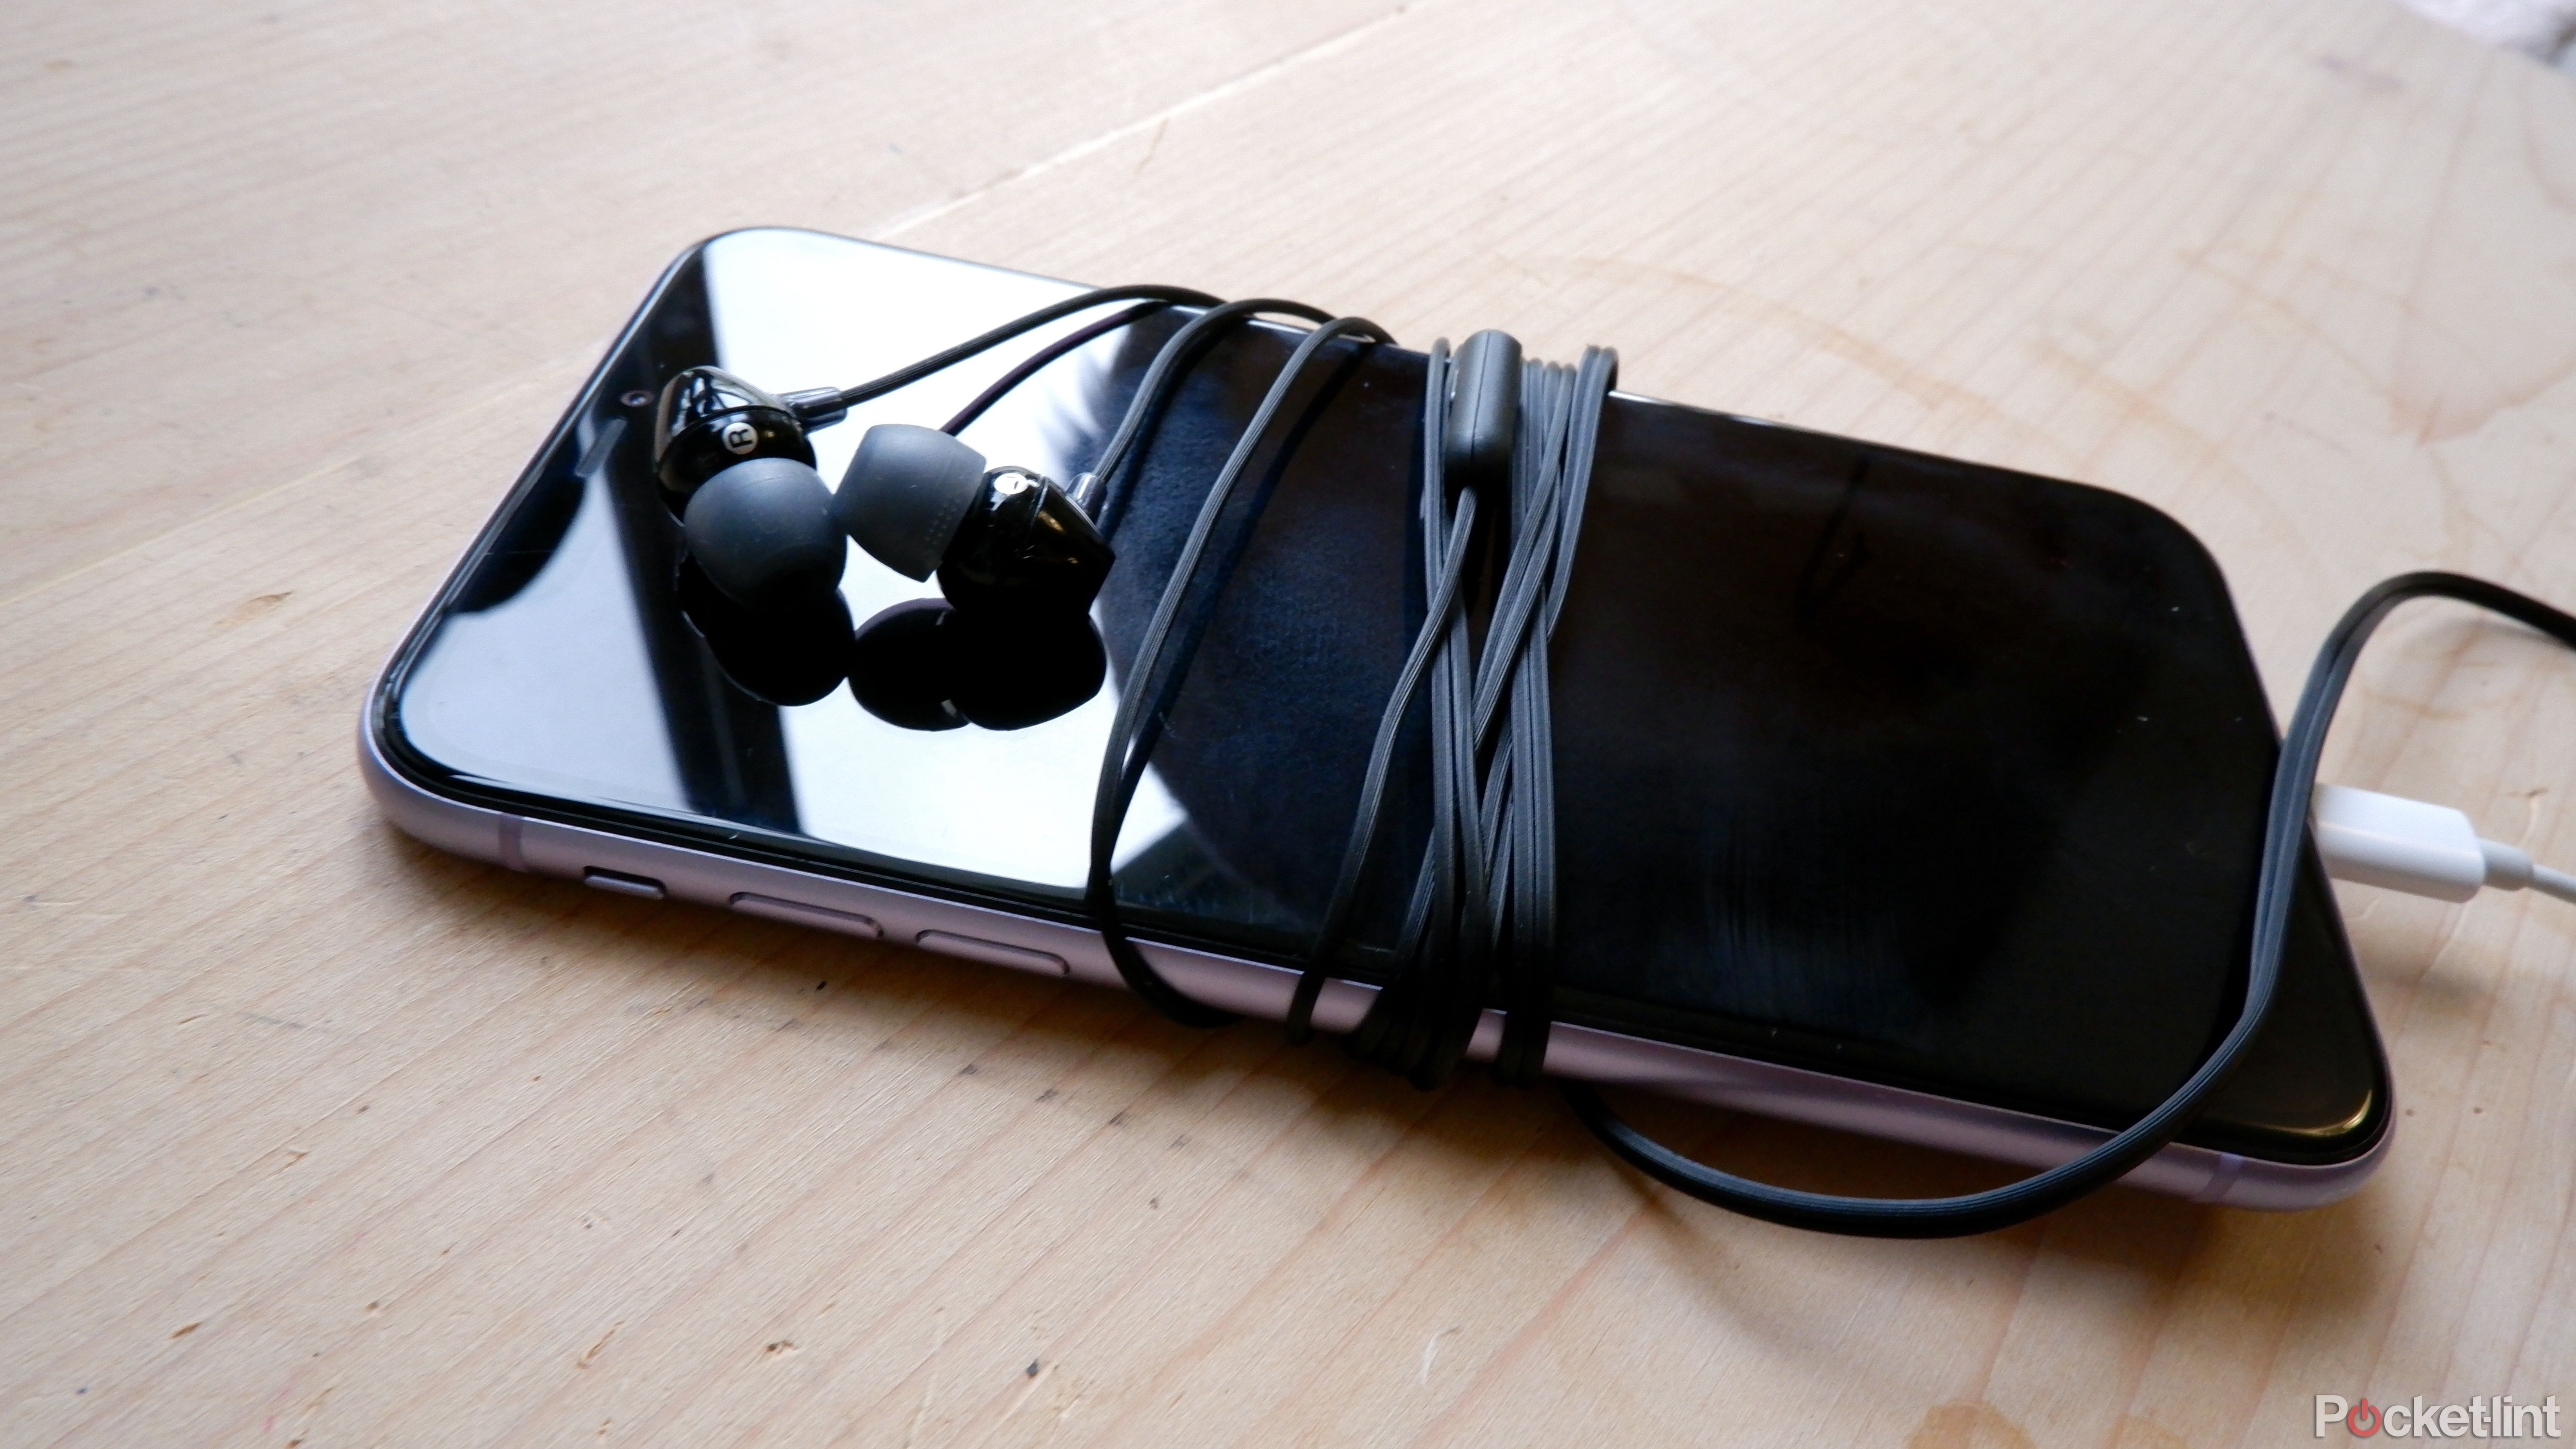 Sony mdr-e15ap earbuds wrapped around a phone